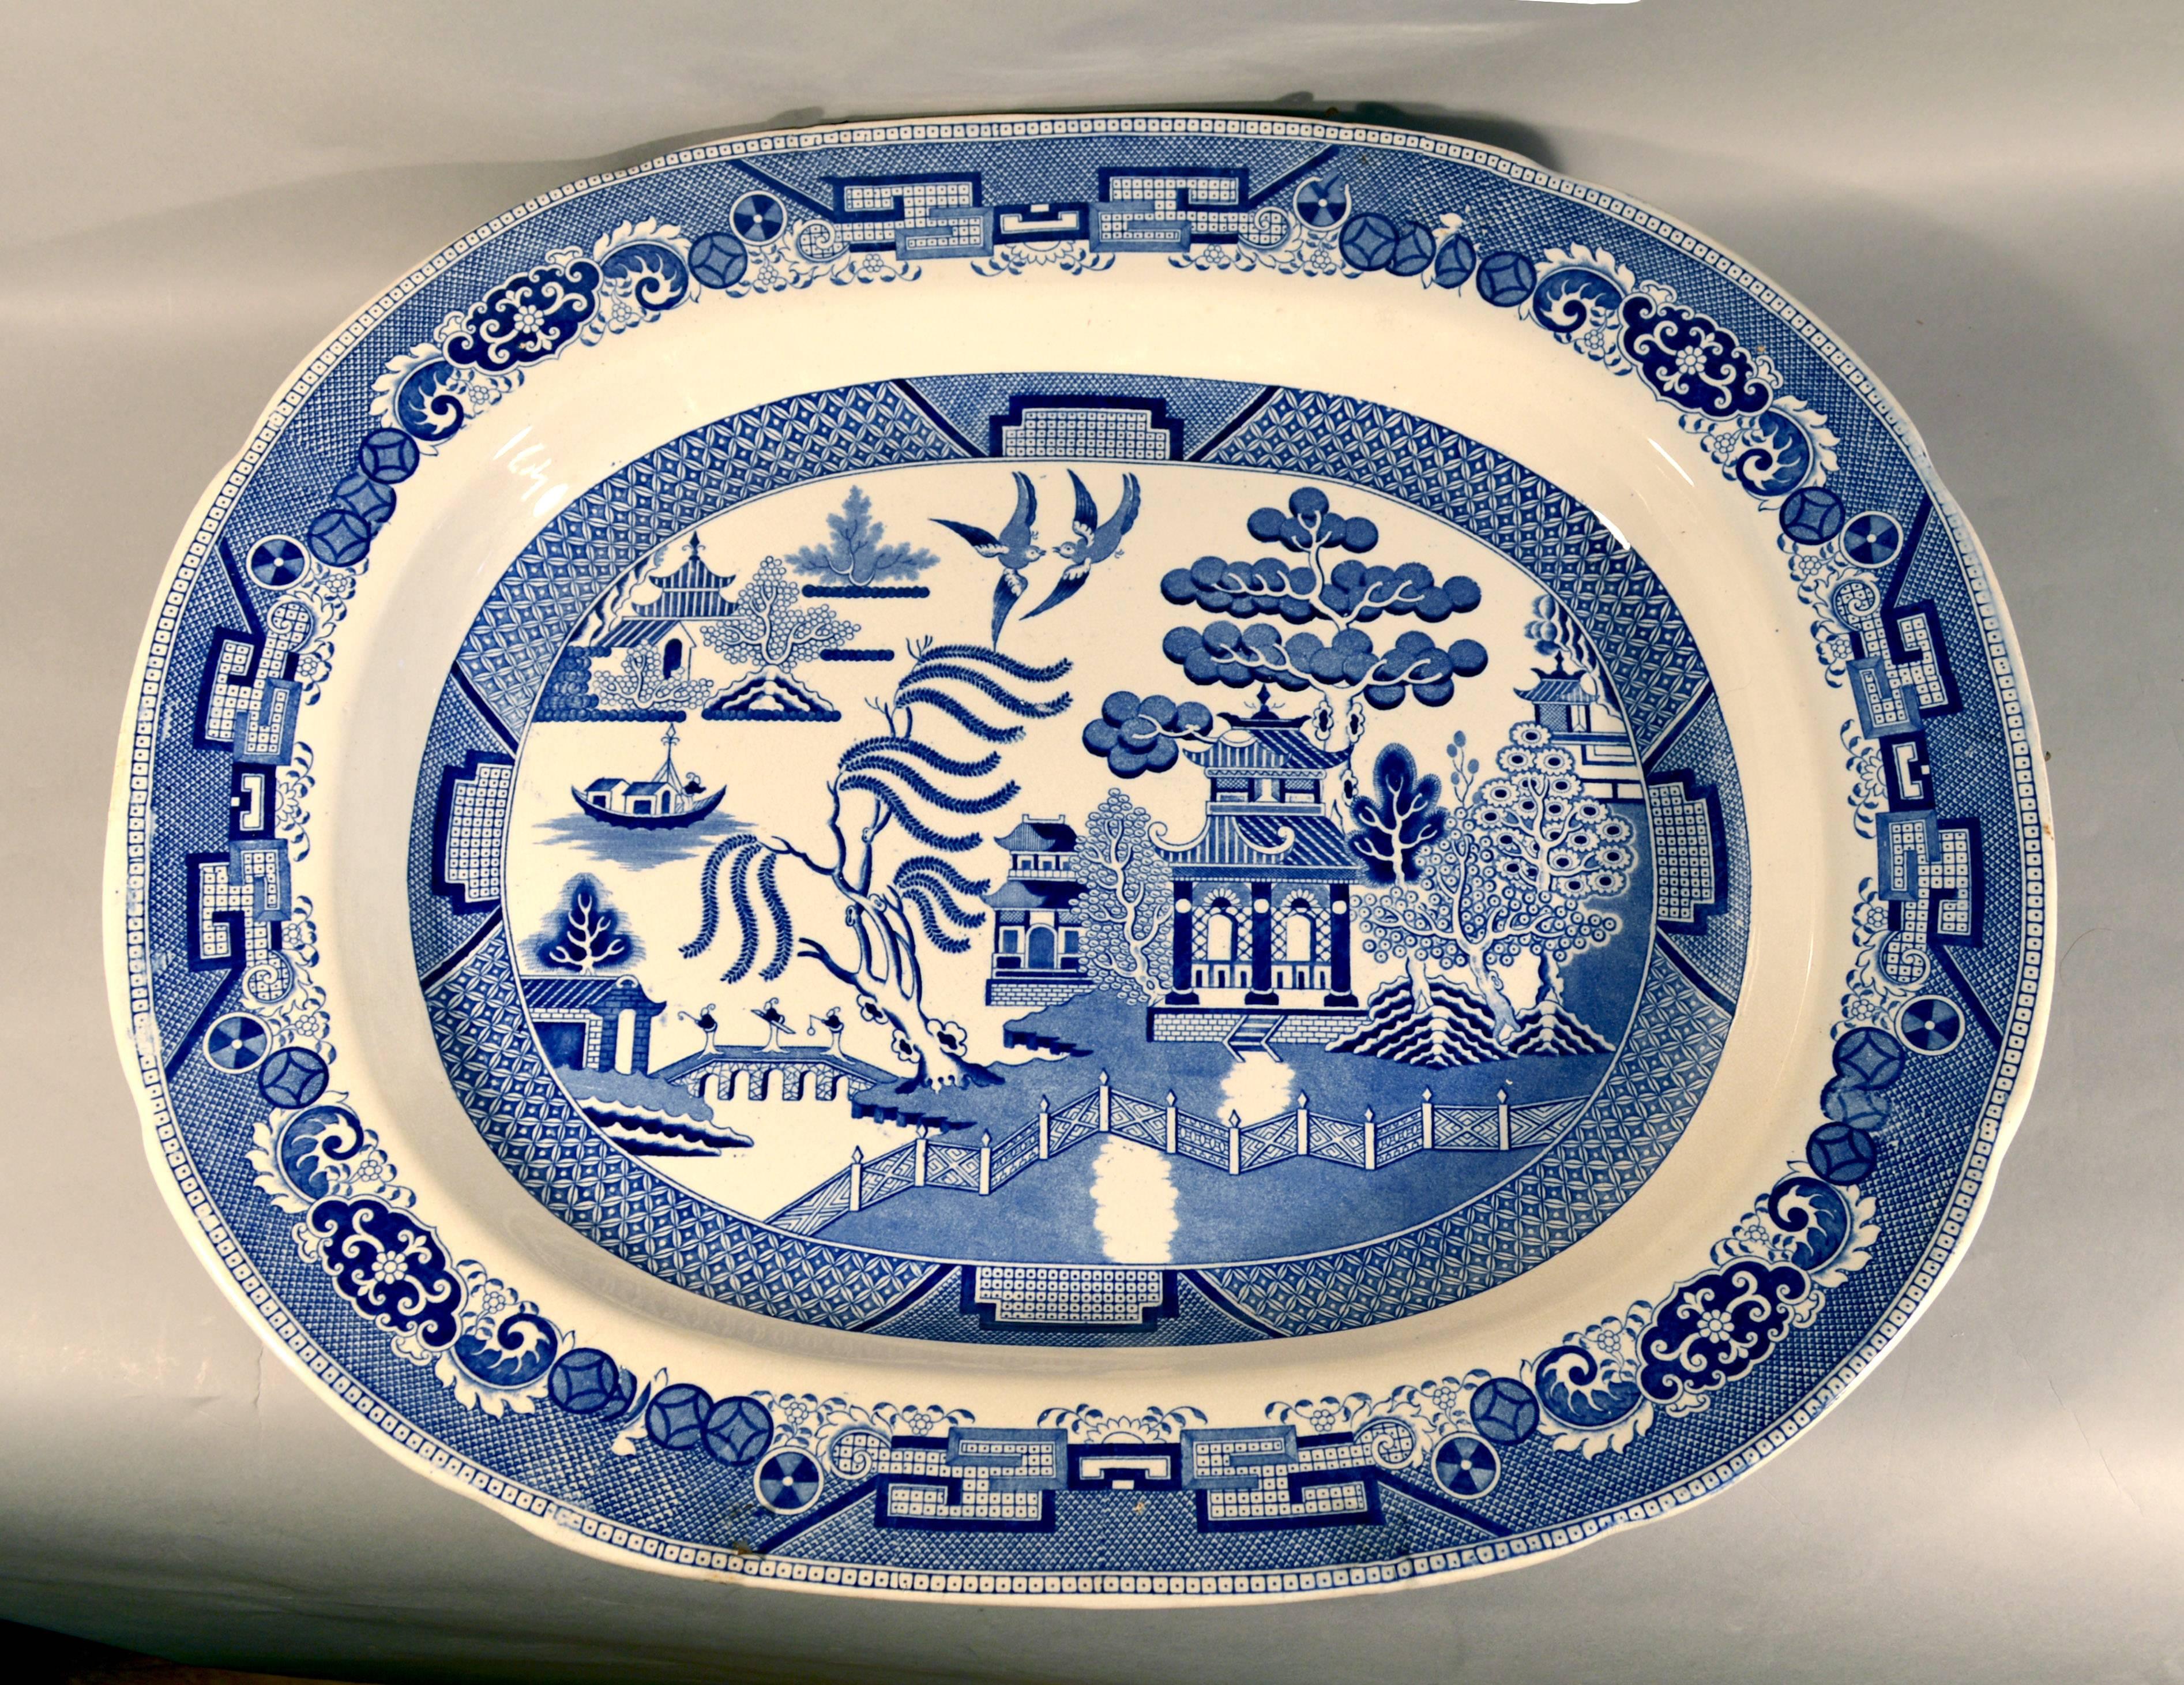 Staffordshire large pottery blue and white large printed chinoiserie dish, 
19th Century

The Staffordshire underglaze blue and white deep dish is printed with a chinoiserie scene of a pagoda amongst trees and with a zig-zag fence in the foreground